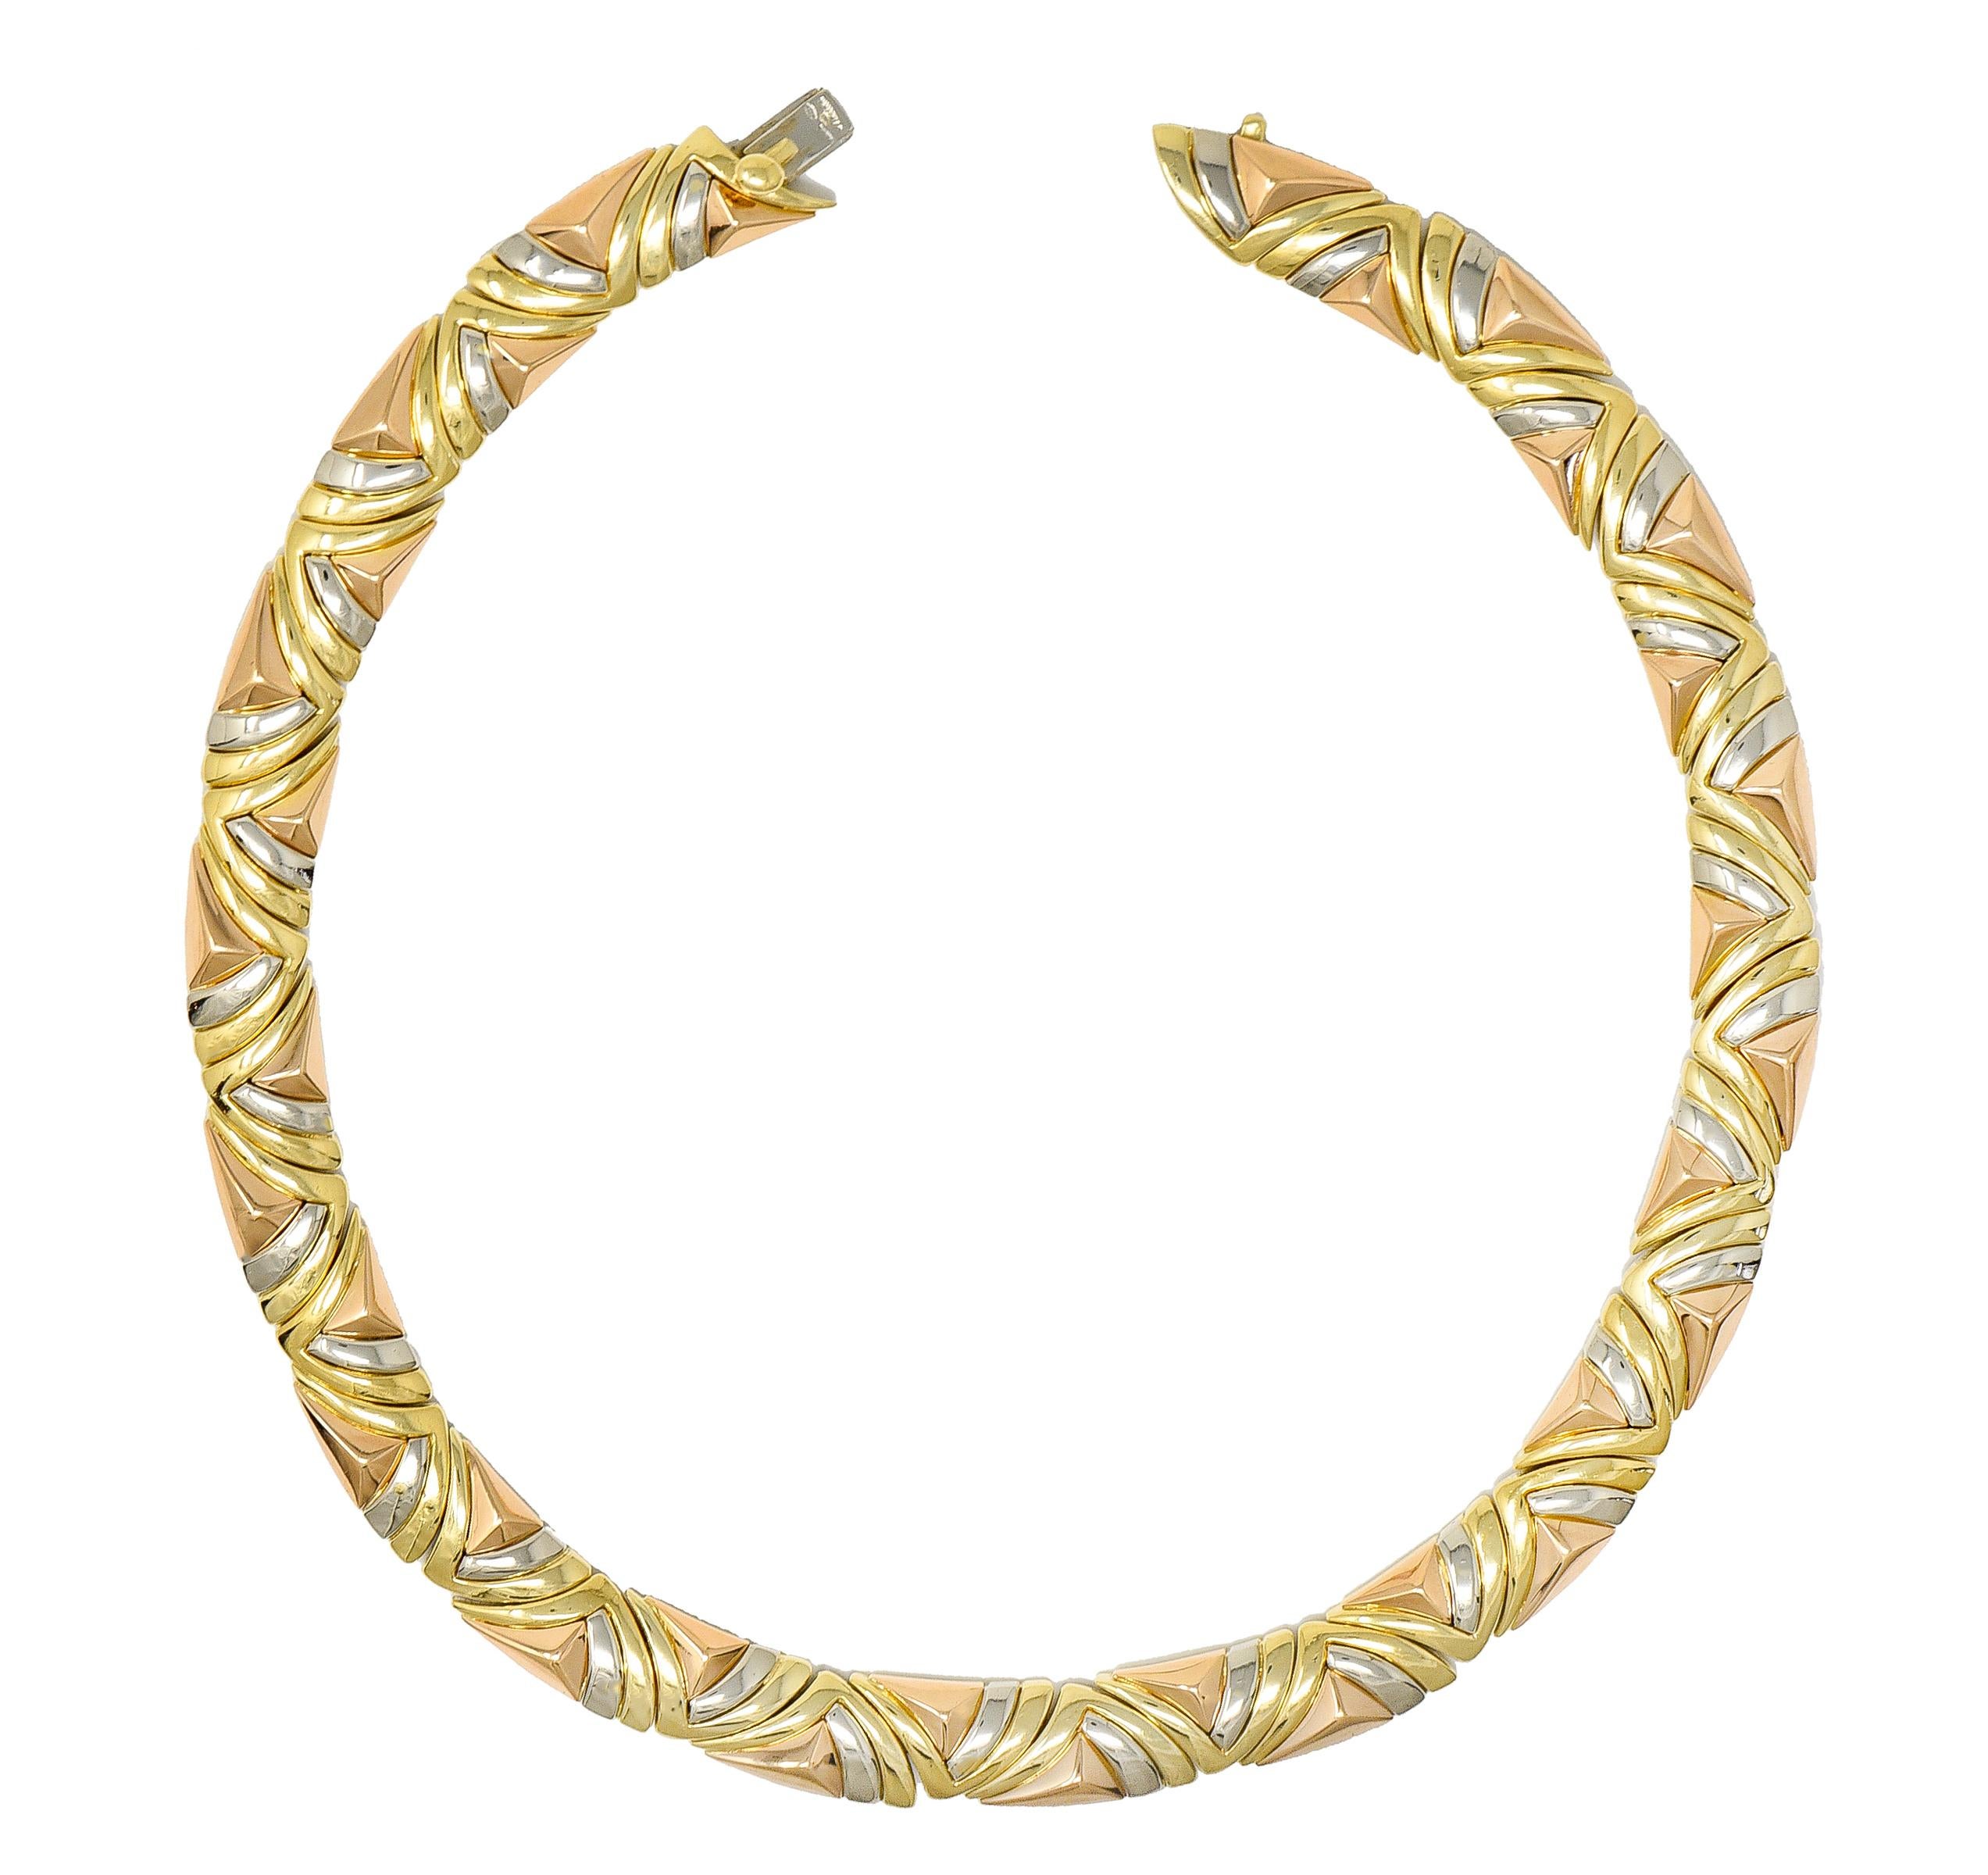 Designed as a collar necklace comprised of fitted forms in tri-gold
Rose gold forms are dimensional faceted pyramids
Yellow gold forms are sweeping chevrons
White gold forms are curved accents
With high polished finish
Completed by a concealed clasp